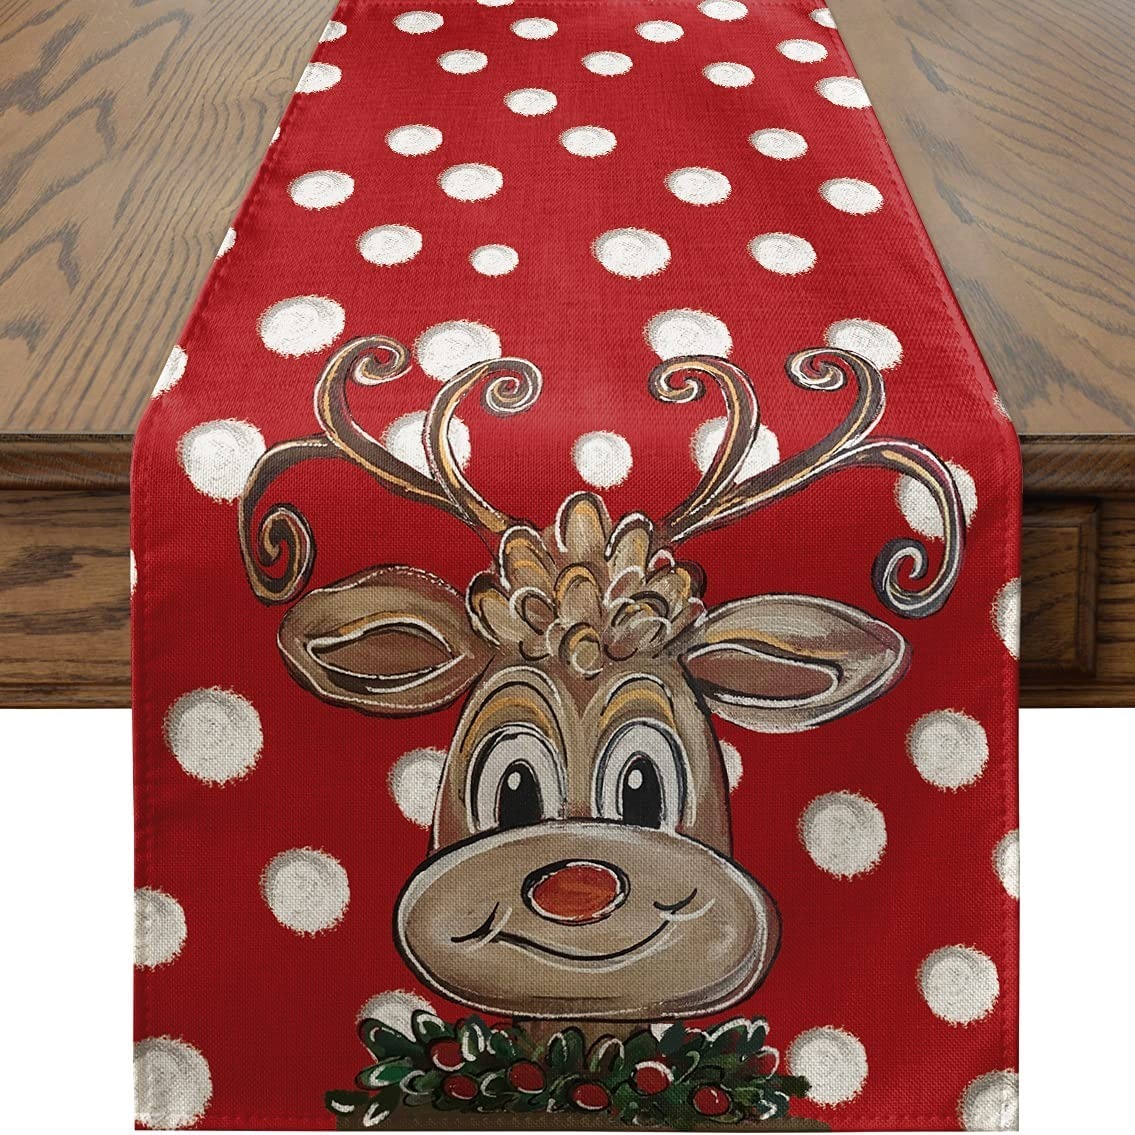 

1pc Cute Cartoon Reindeer Table Runner, Polka Dot Red Christmas Table Runner, Seasonal Winter Xmas Holiday Kitchen Dining Table Decoration For Indoor Outdoor Home Party Decor, 13 X 72 Inch